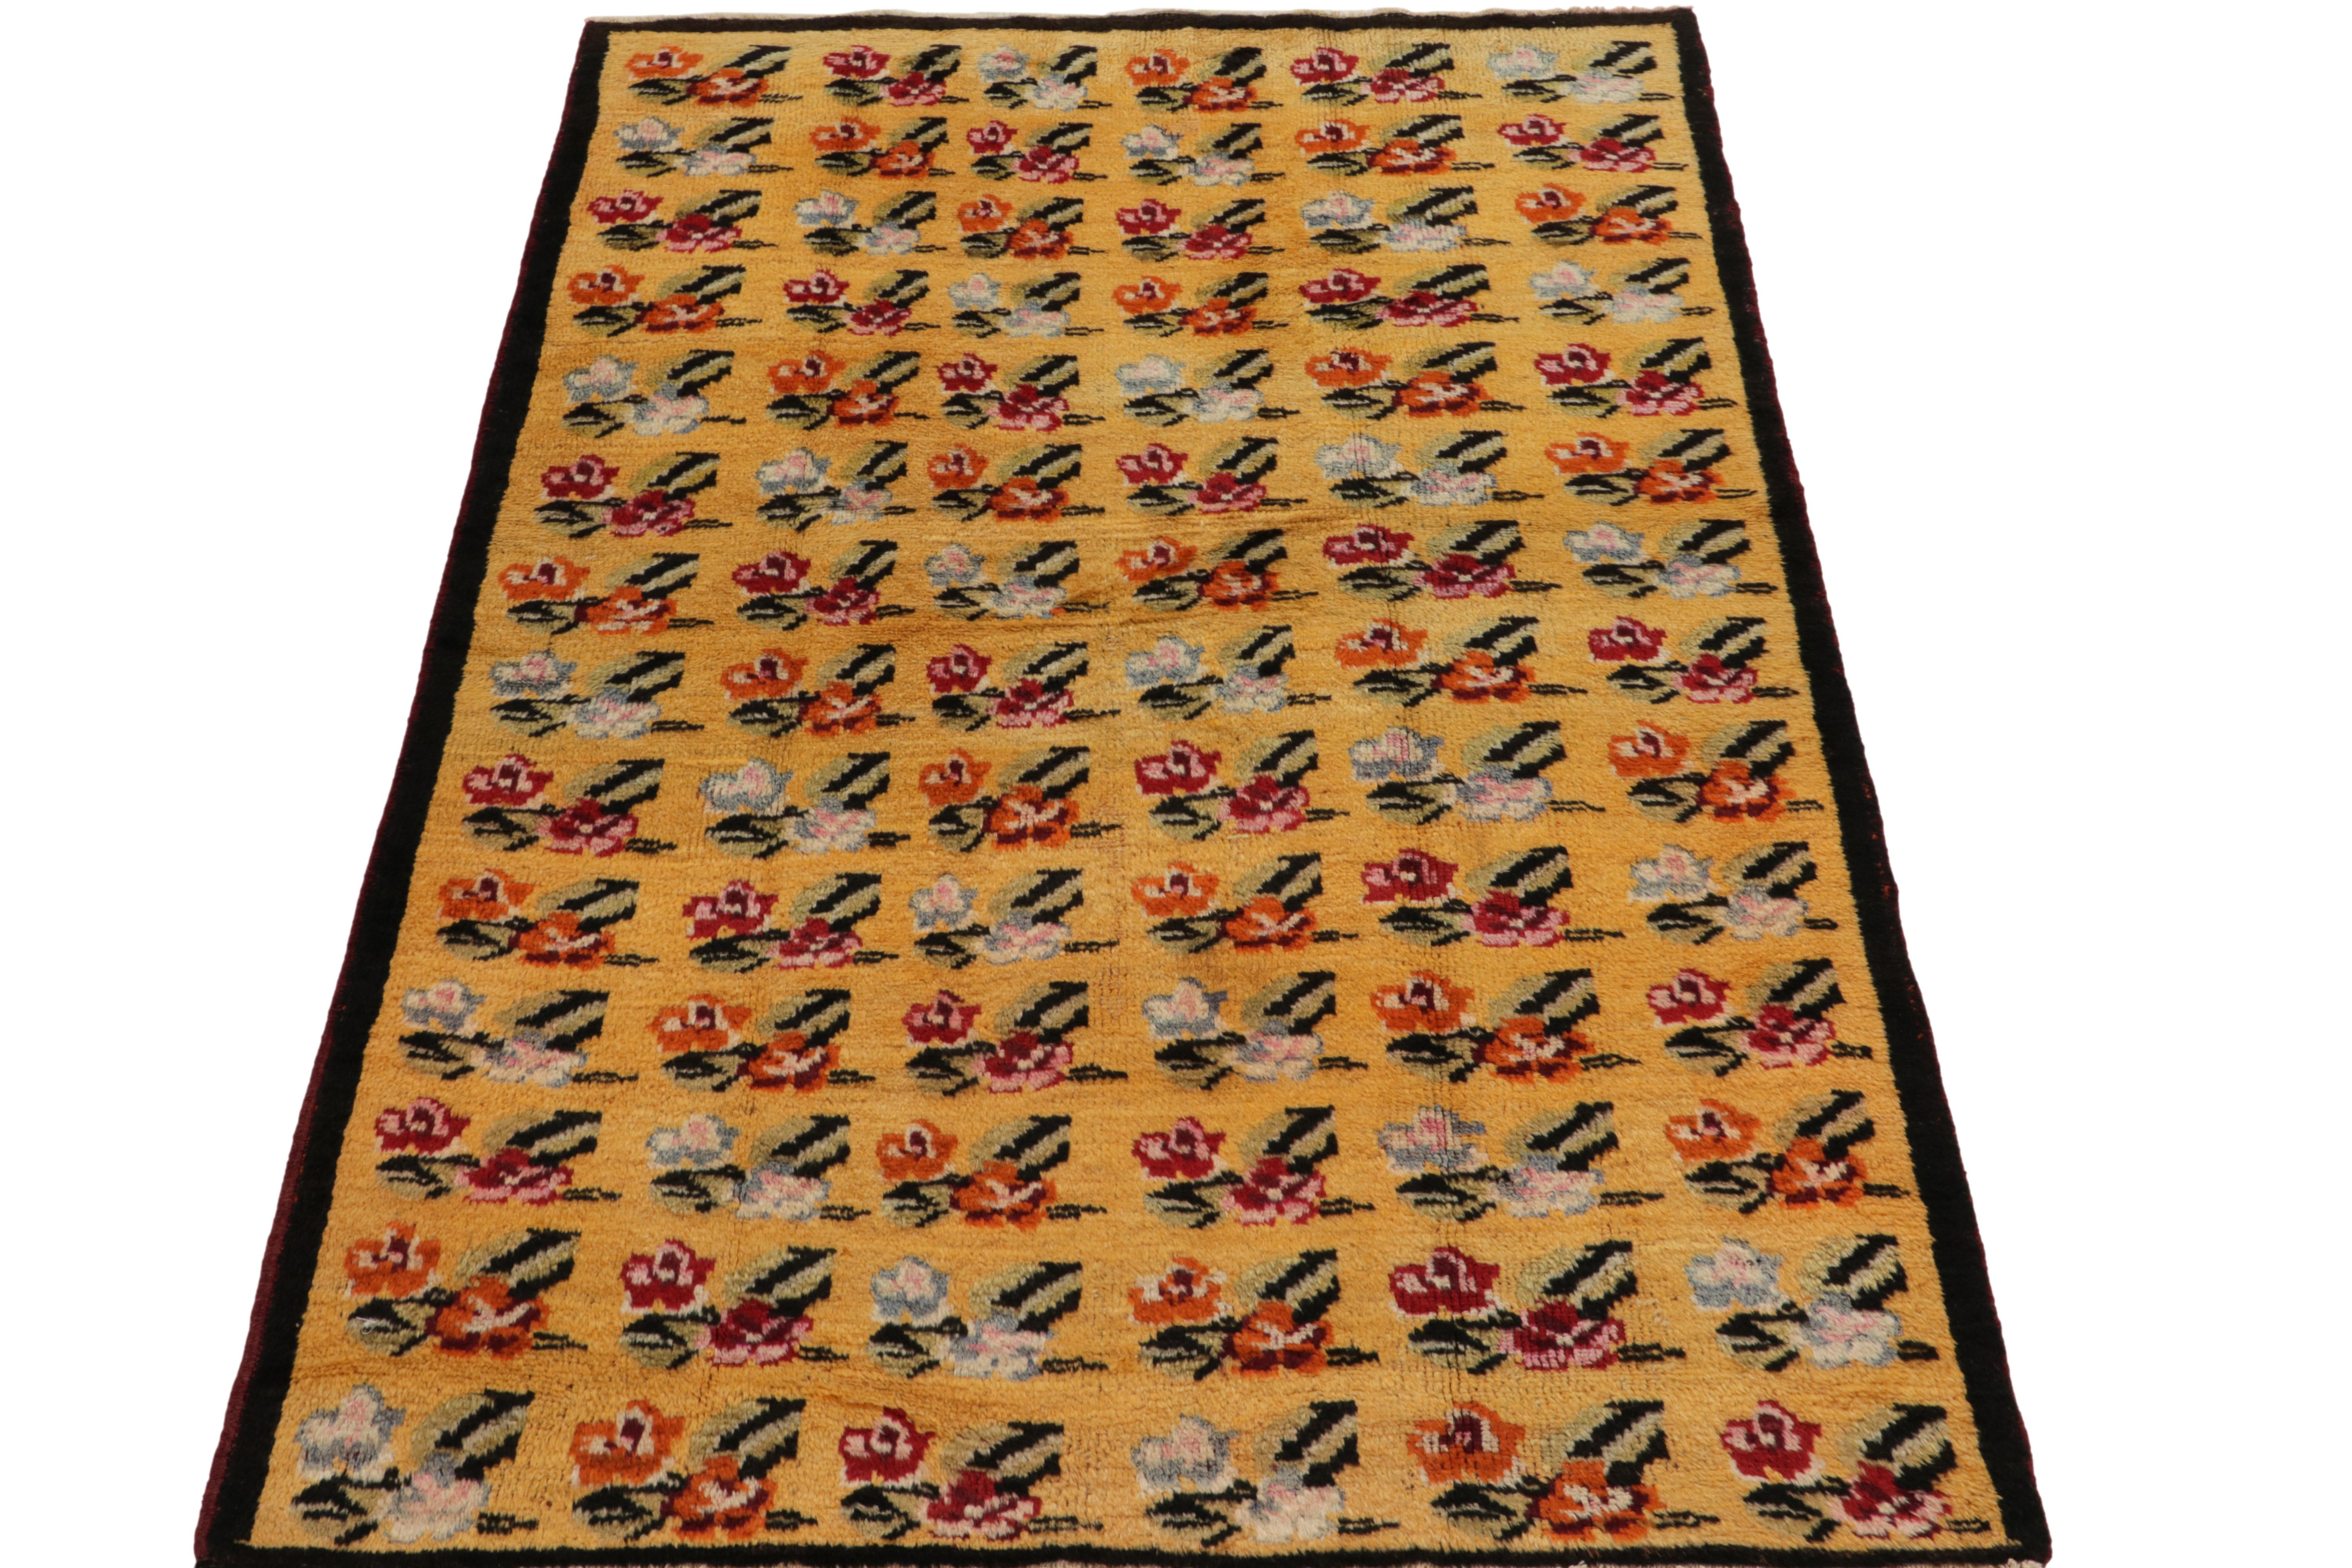 A 5x7 vintage rug in mid-century Deco style, from a bold Turkish designer commemorated in Rug & Kilim’s Mid-Century Pasha Collection. Hand-knotted in wool, the all over pattern depicts pink and red roses with pale green and pink accents against a